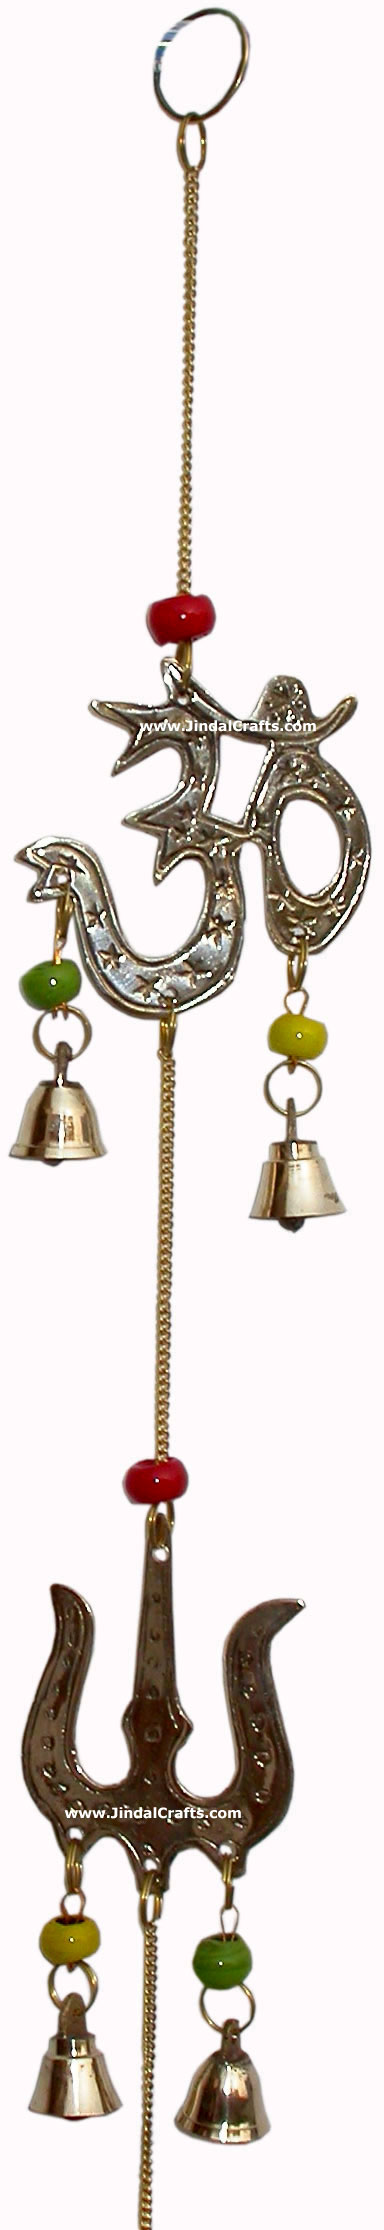 Brass made Wind Chime Home Decoration Feng Shui Artifact from India Metal Crafts